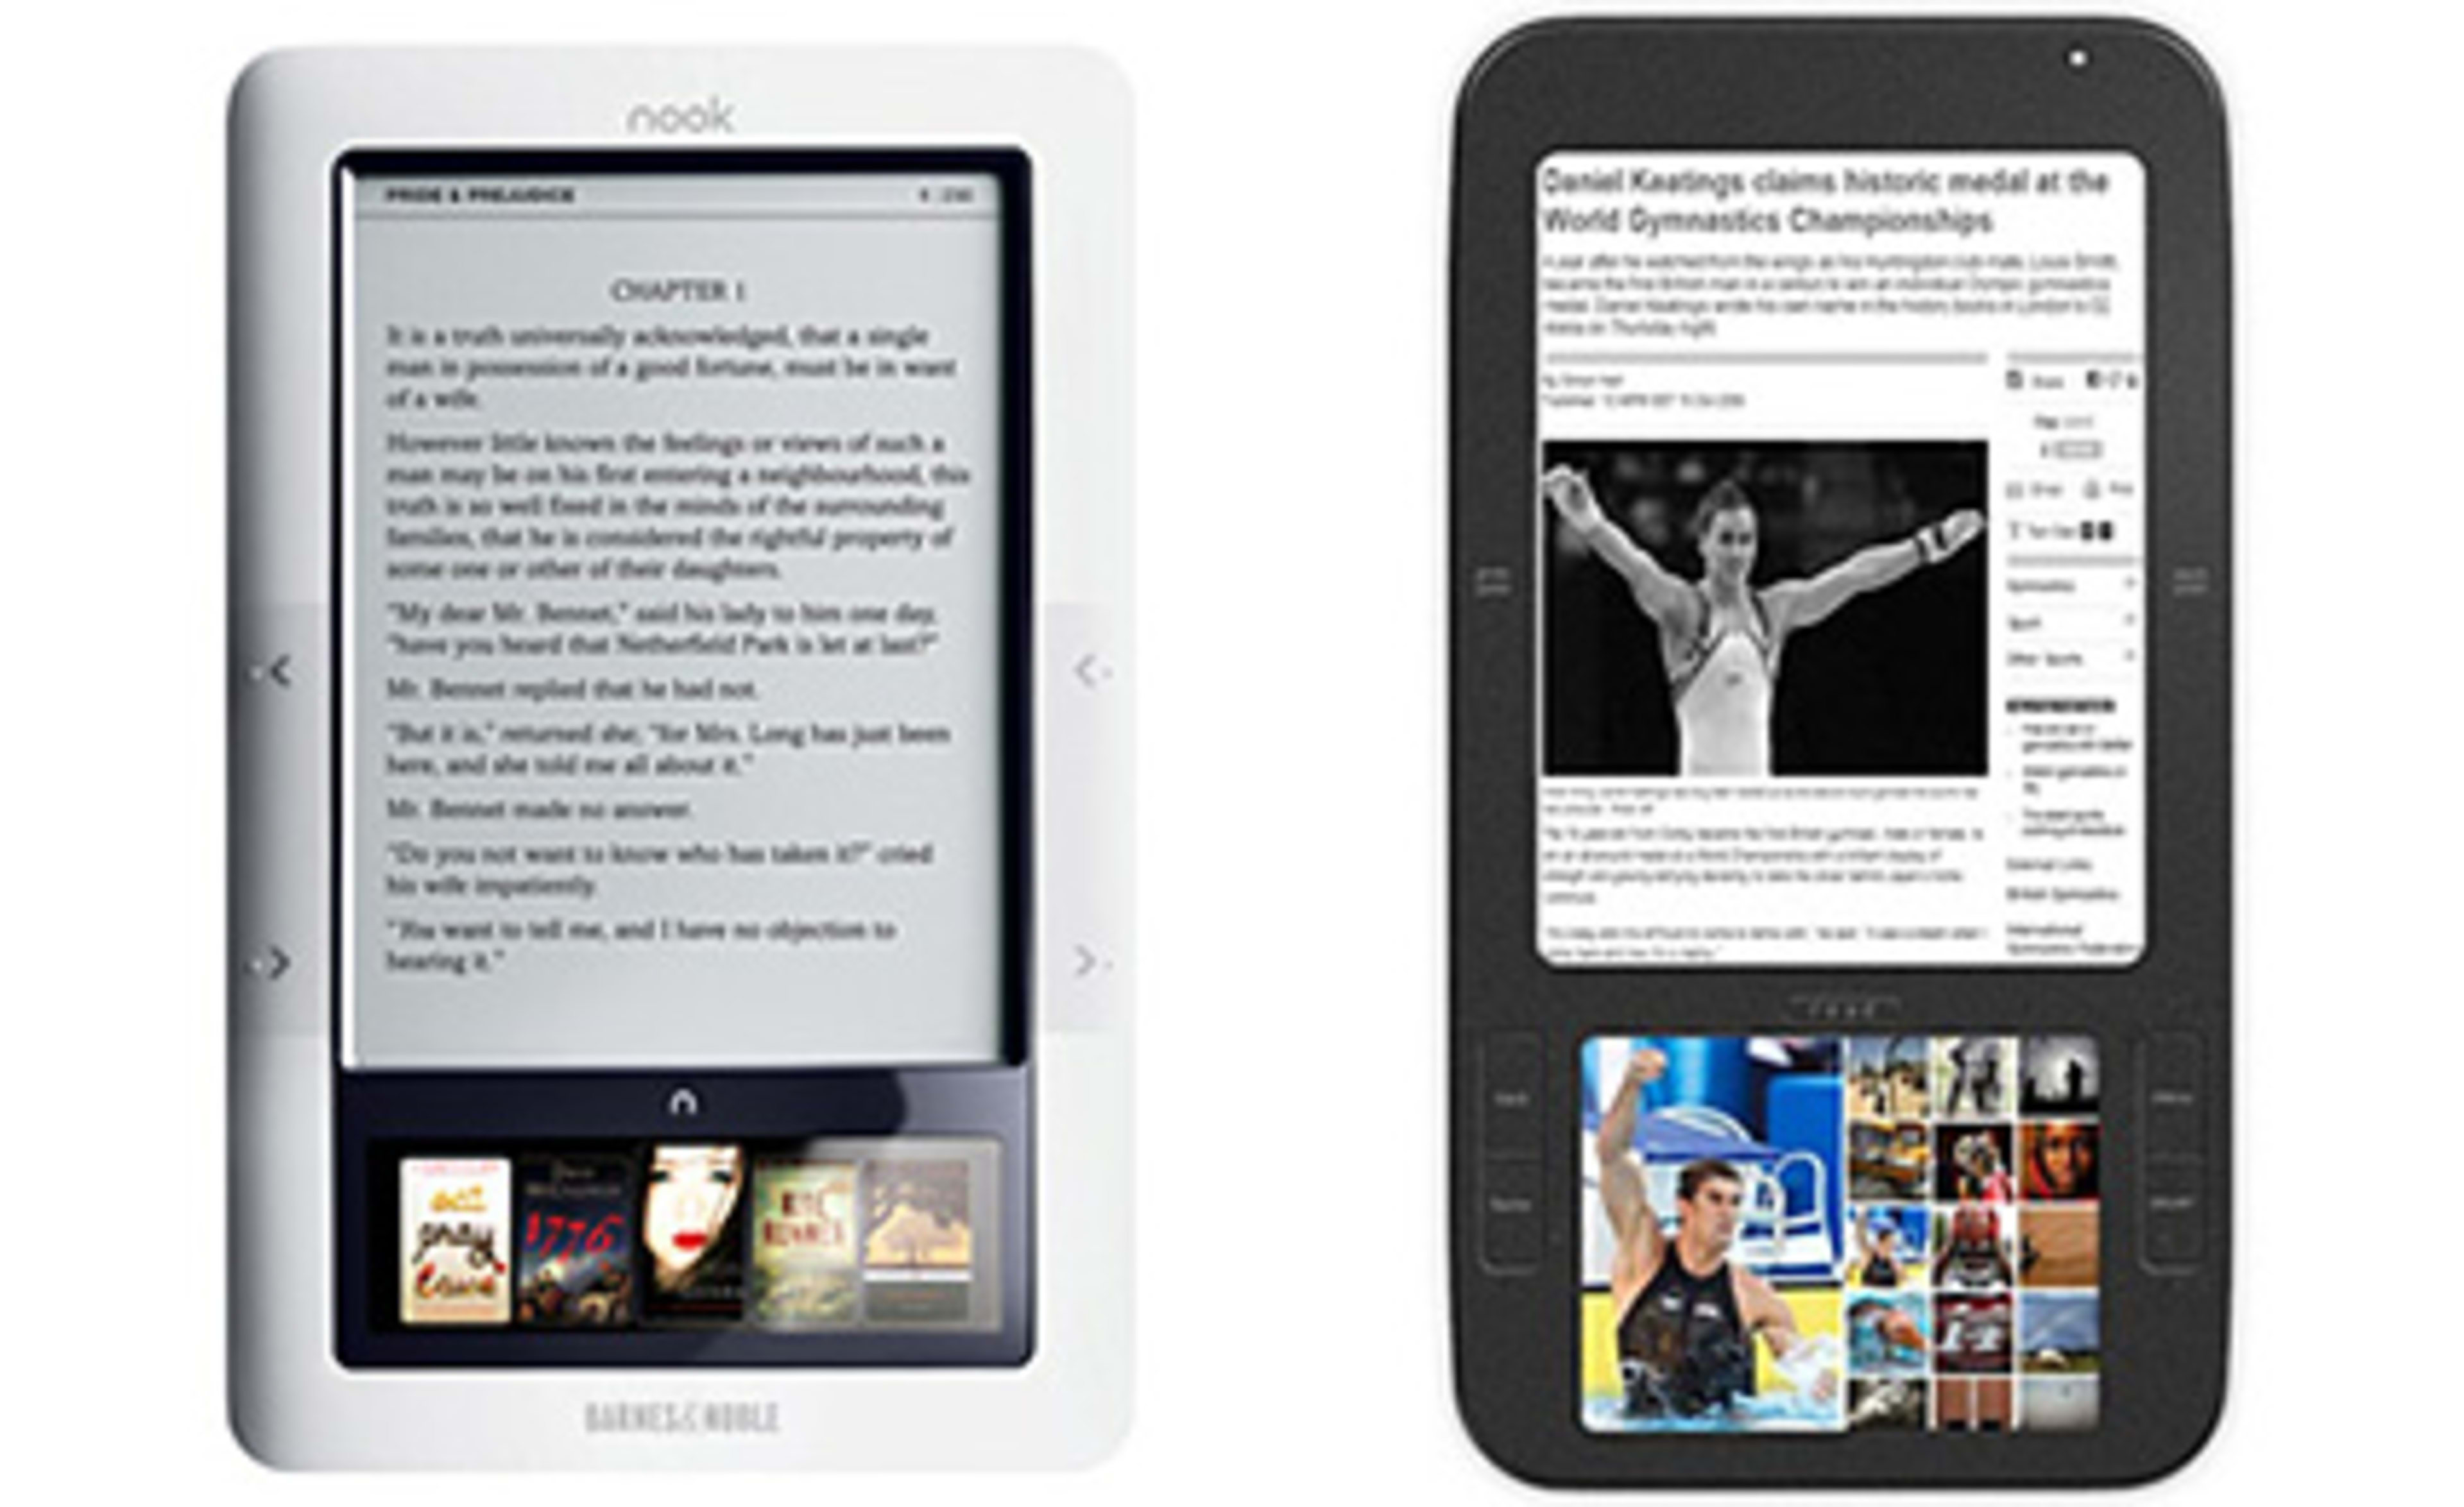 Barnes & Noble’s Nook: Beautiful but Plagiarized?